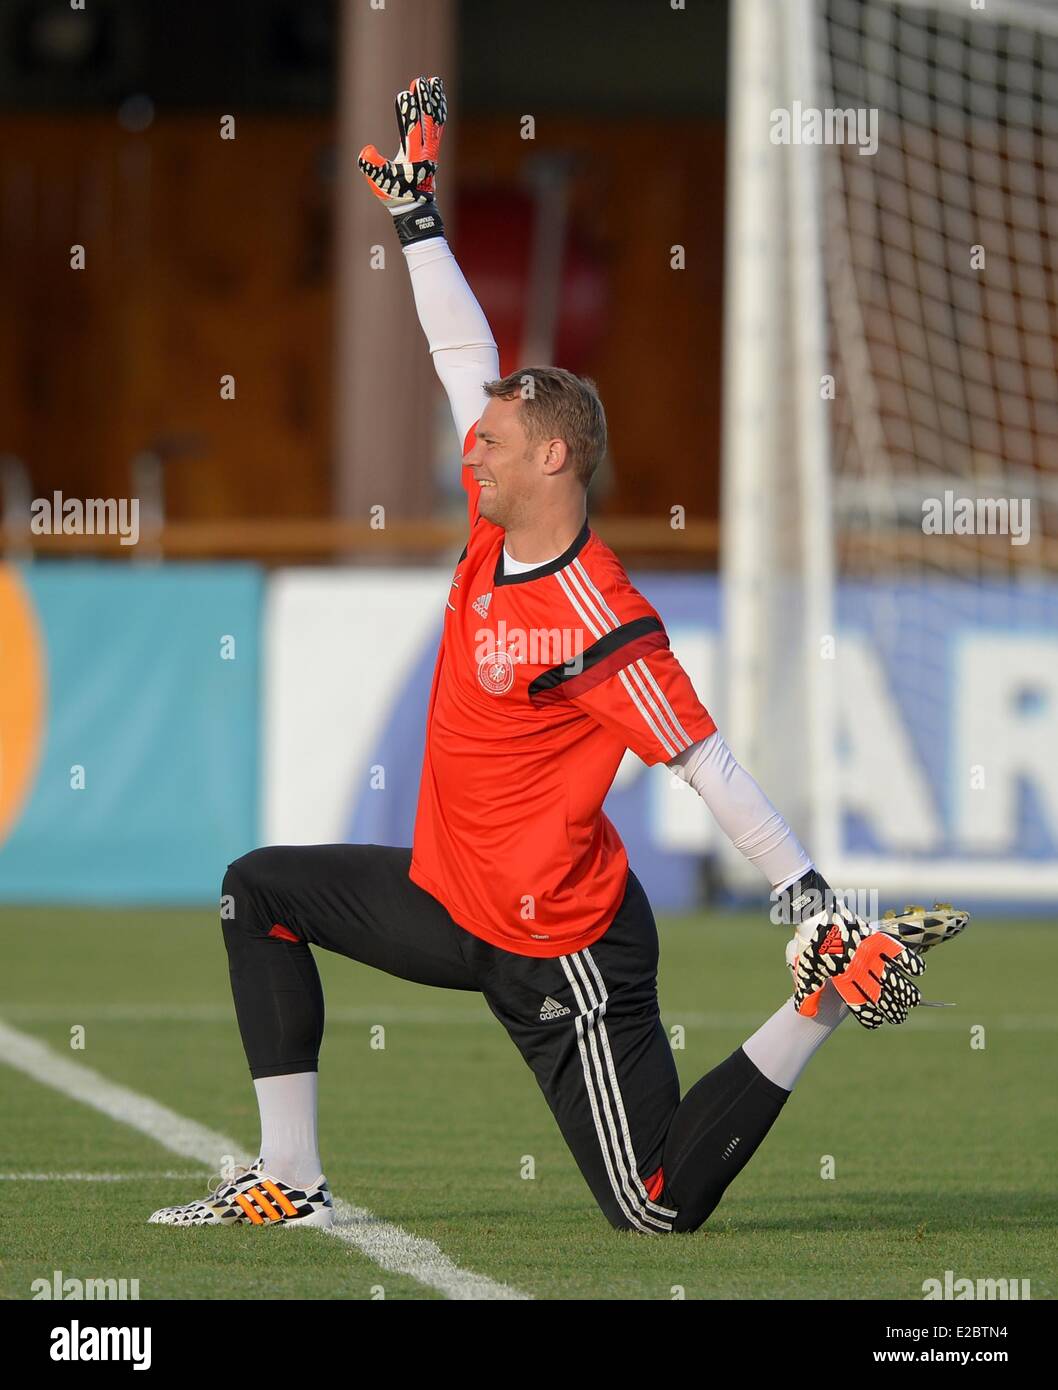 Santo Andre, Brazil. 18th June, 2014. Manuel Neuer warms up during a training session of the German national soccer team at the training center in Santo Andre, Brazil, 18 June 2014. Photo: Thomas Eisenhuth/dpa/Alamy Live News Stock Photo